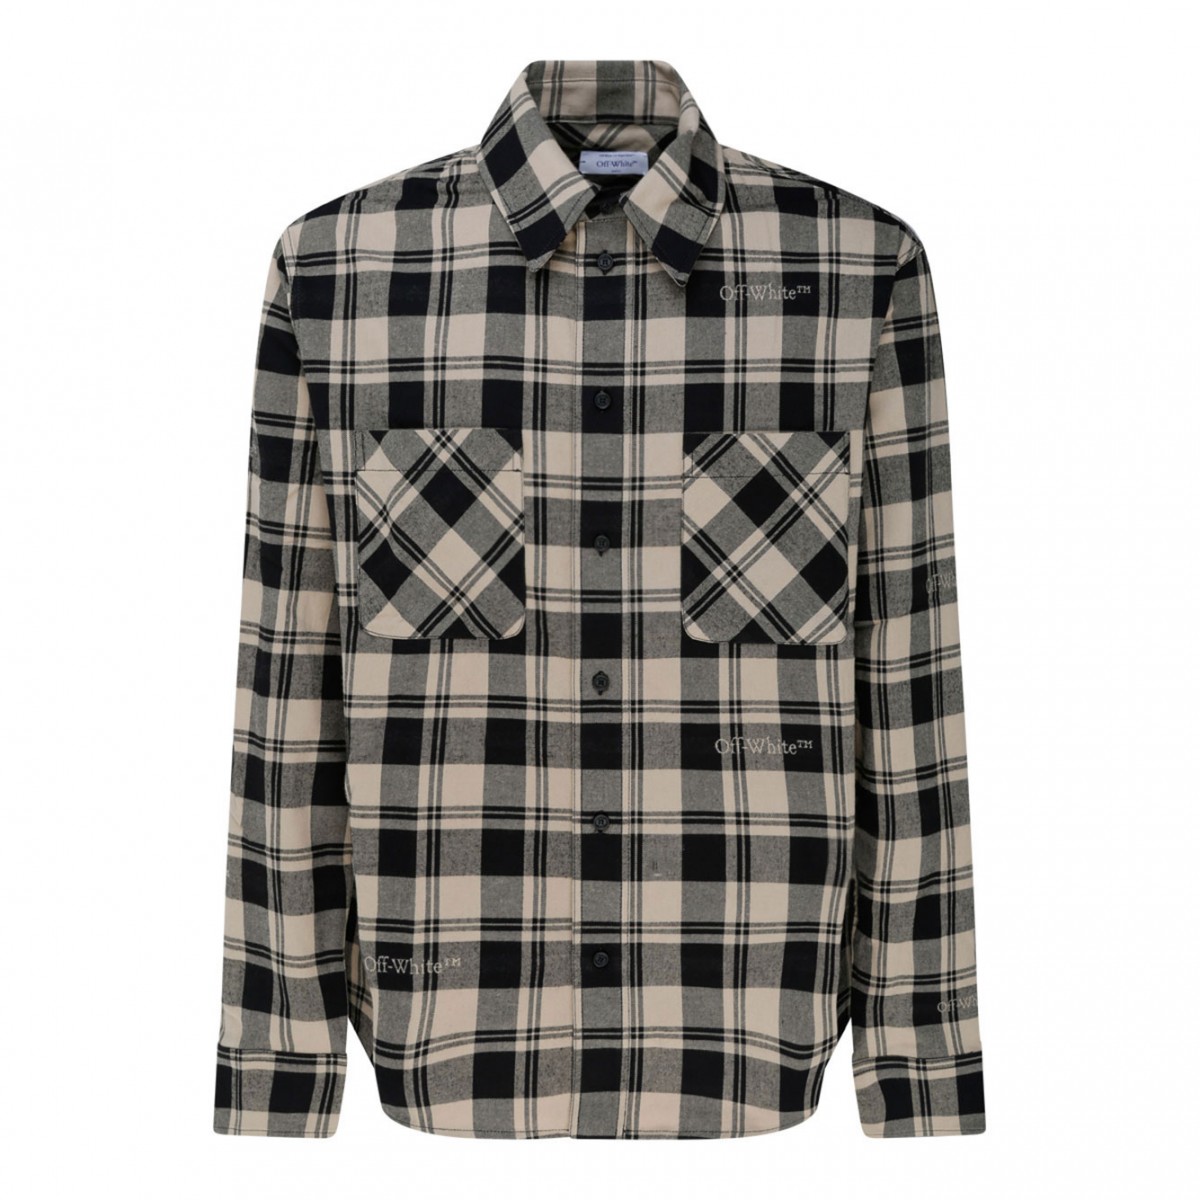 Light Beige and Black Cotton Check Print Flannel Shirt